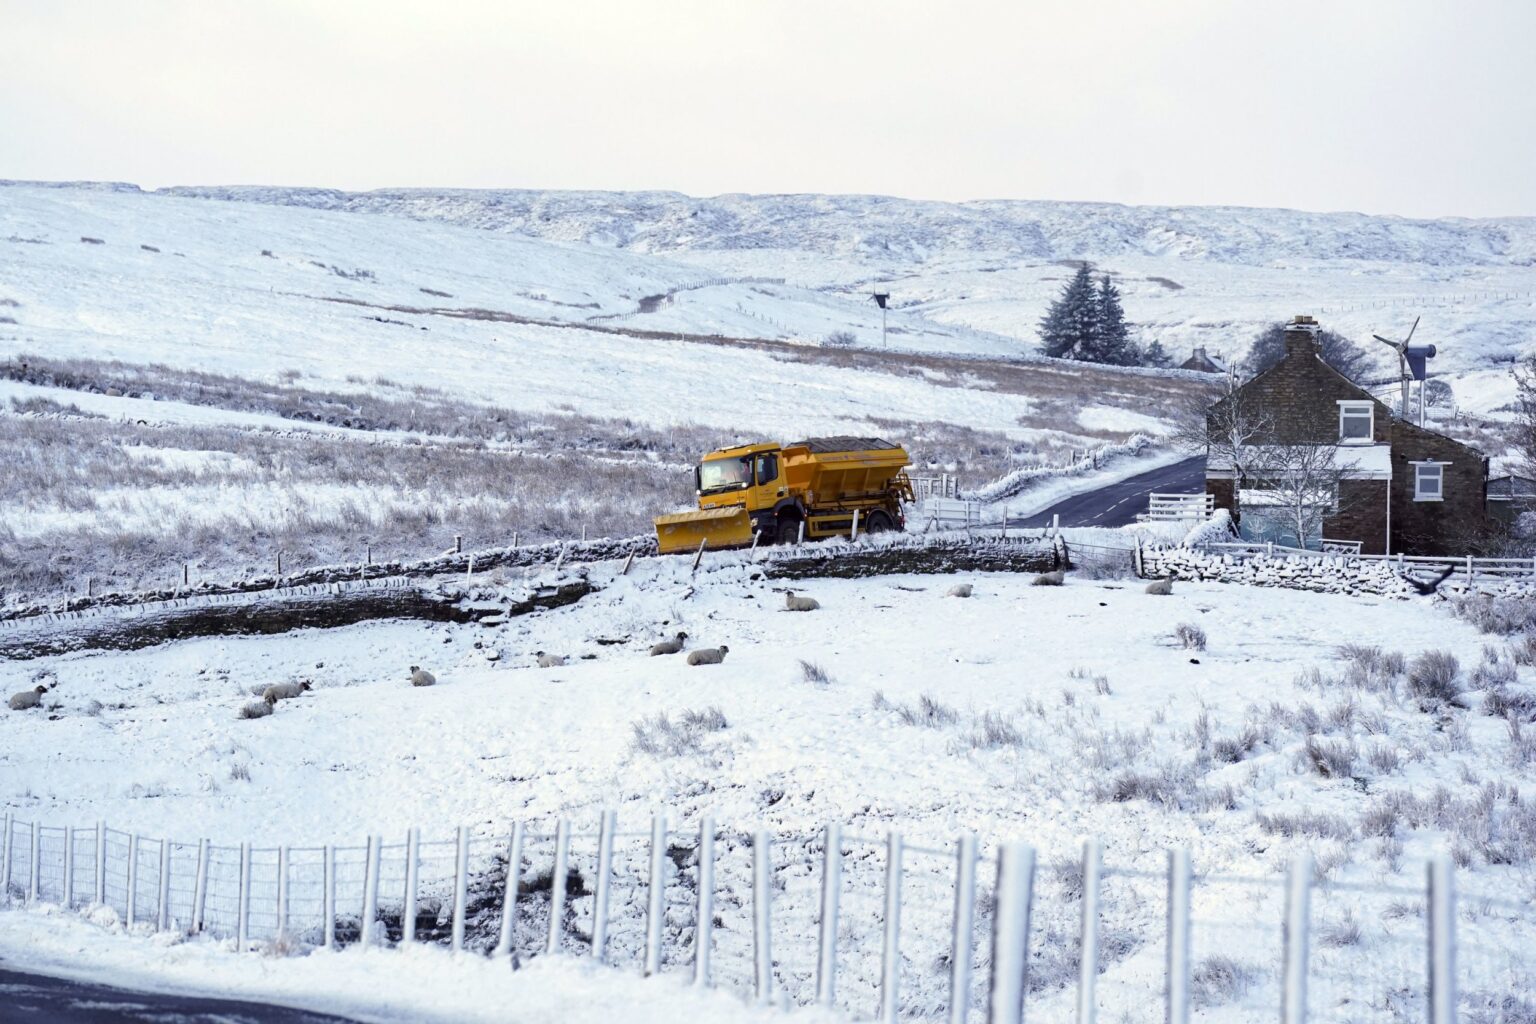 Yellow weather warning for ice issued across most of the UK